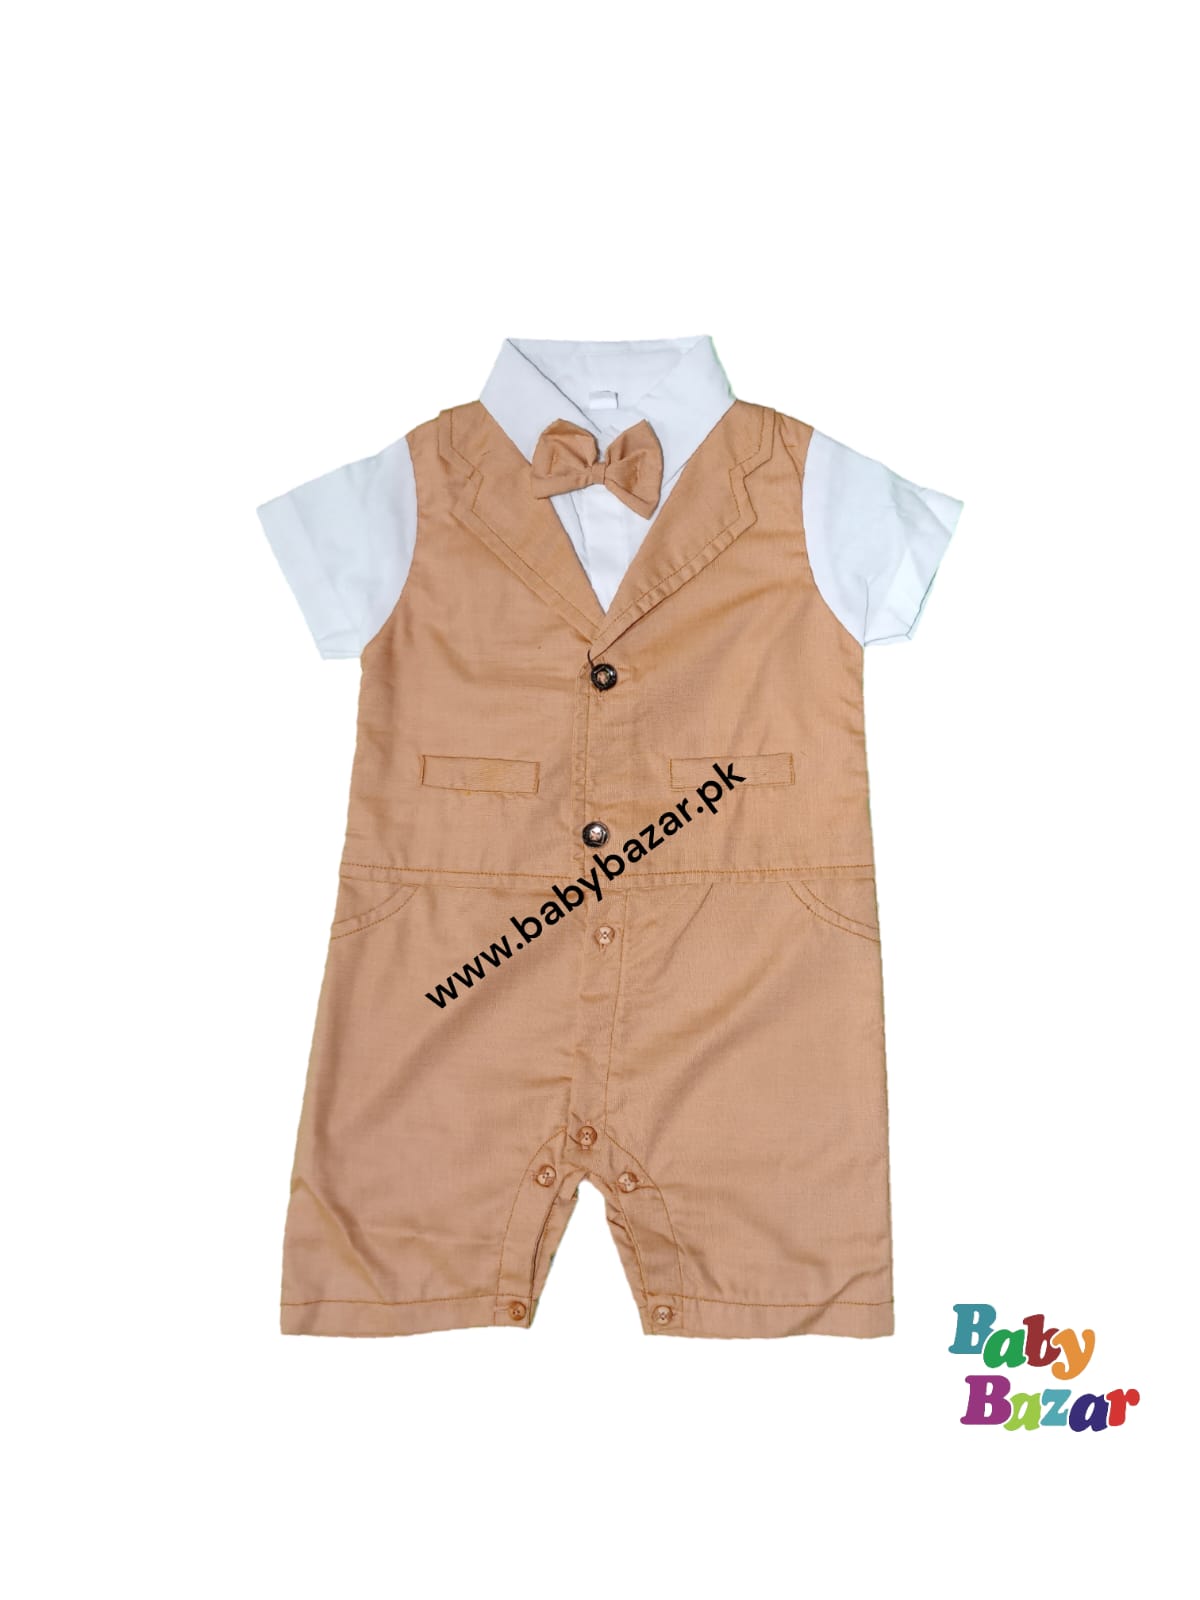 Summer Stylish Romper For Baby Boy In Beautiful Color